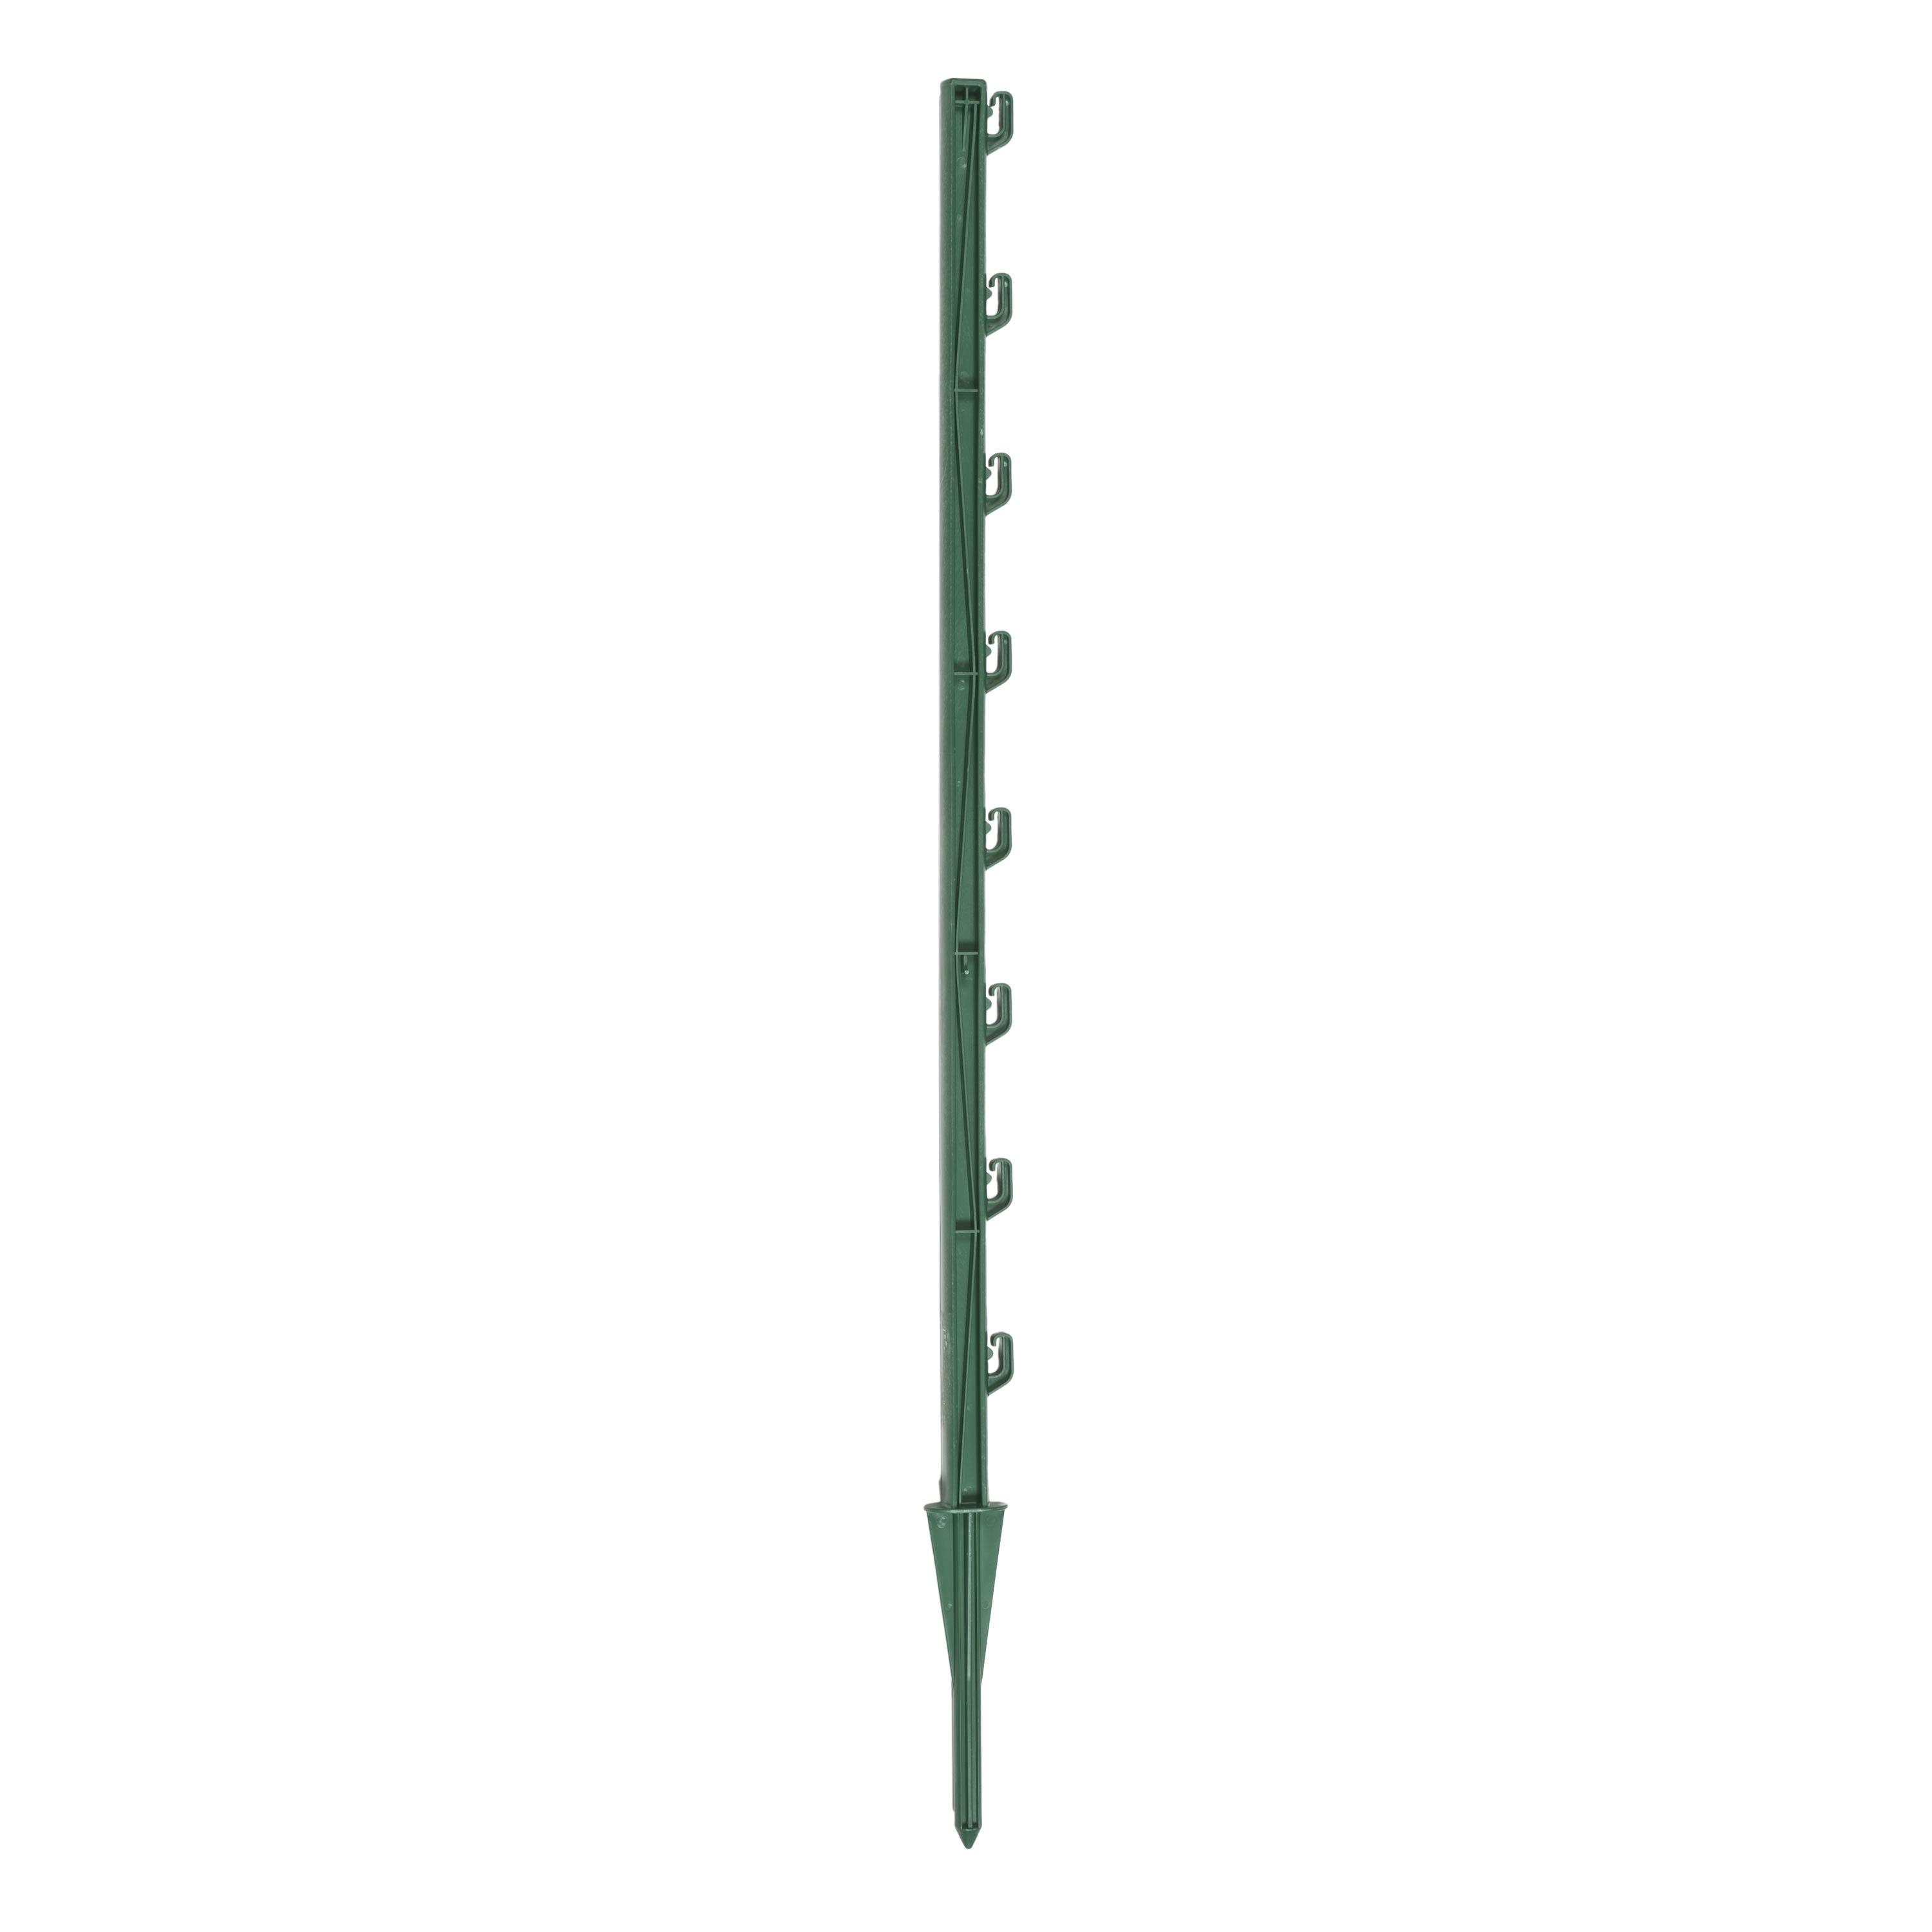 20 X GREEN PLASTIC POLY MULTIWIRE POSTS 138CM/4ft5" TALL ELECTRIC FENCING POST 